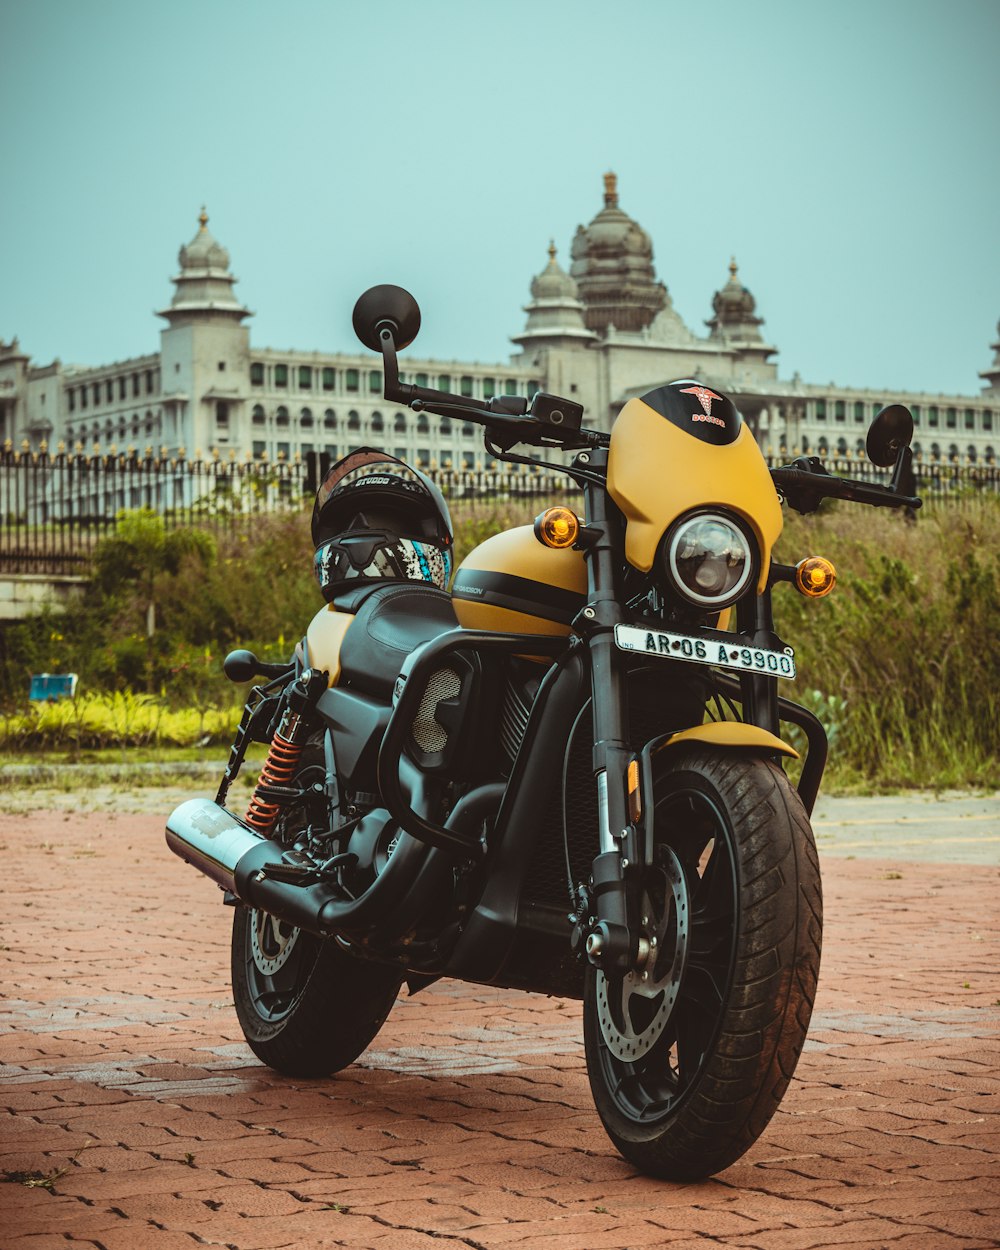 a yellow and black motorcycle parked in front of a building